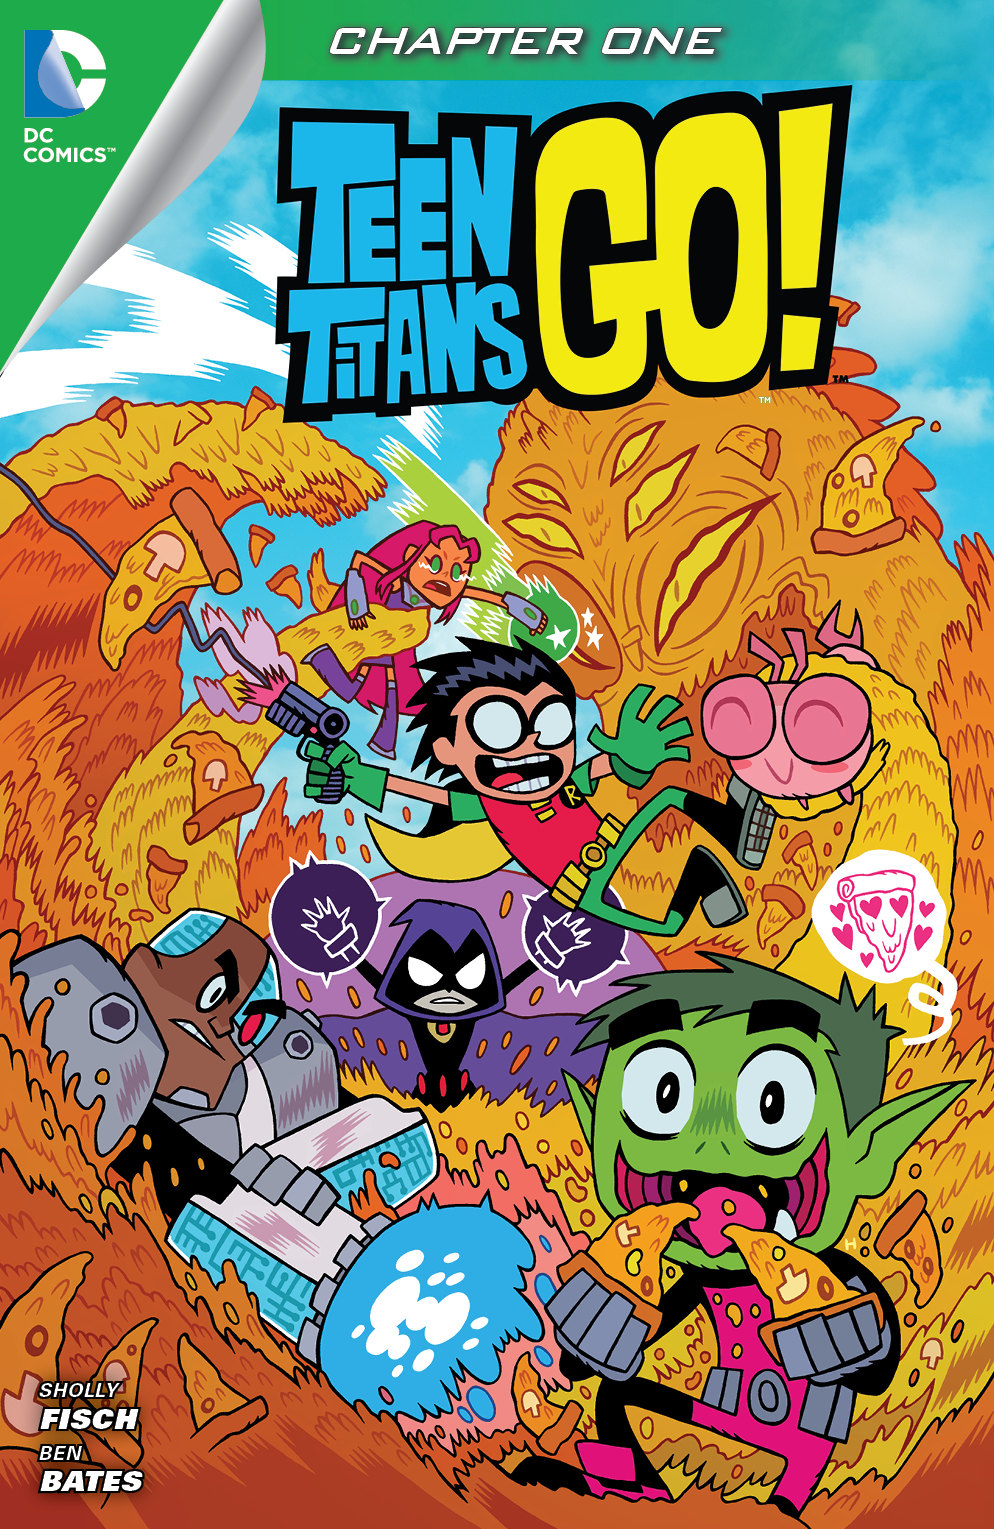 Teen Titans Go! (2013-) #1 preview images